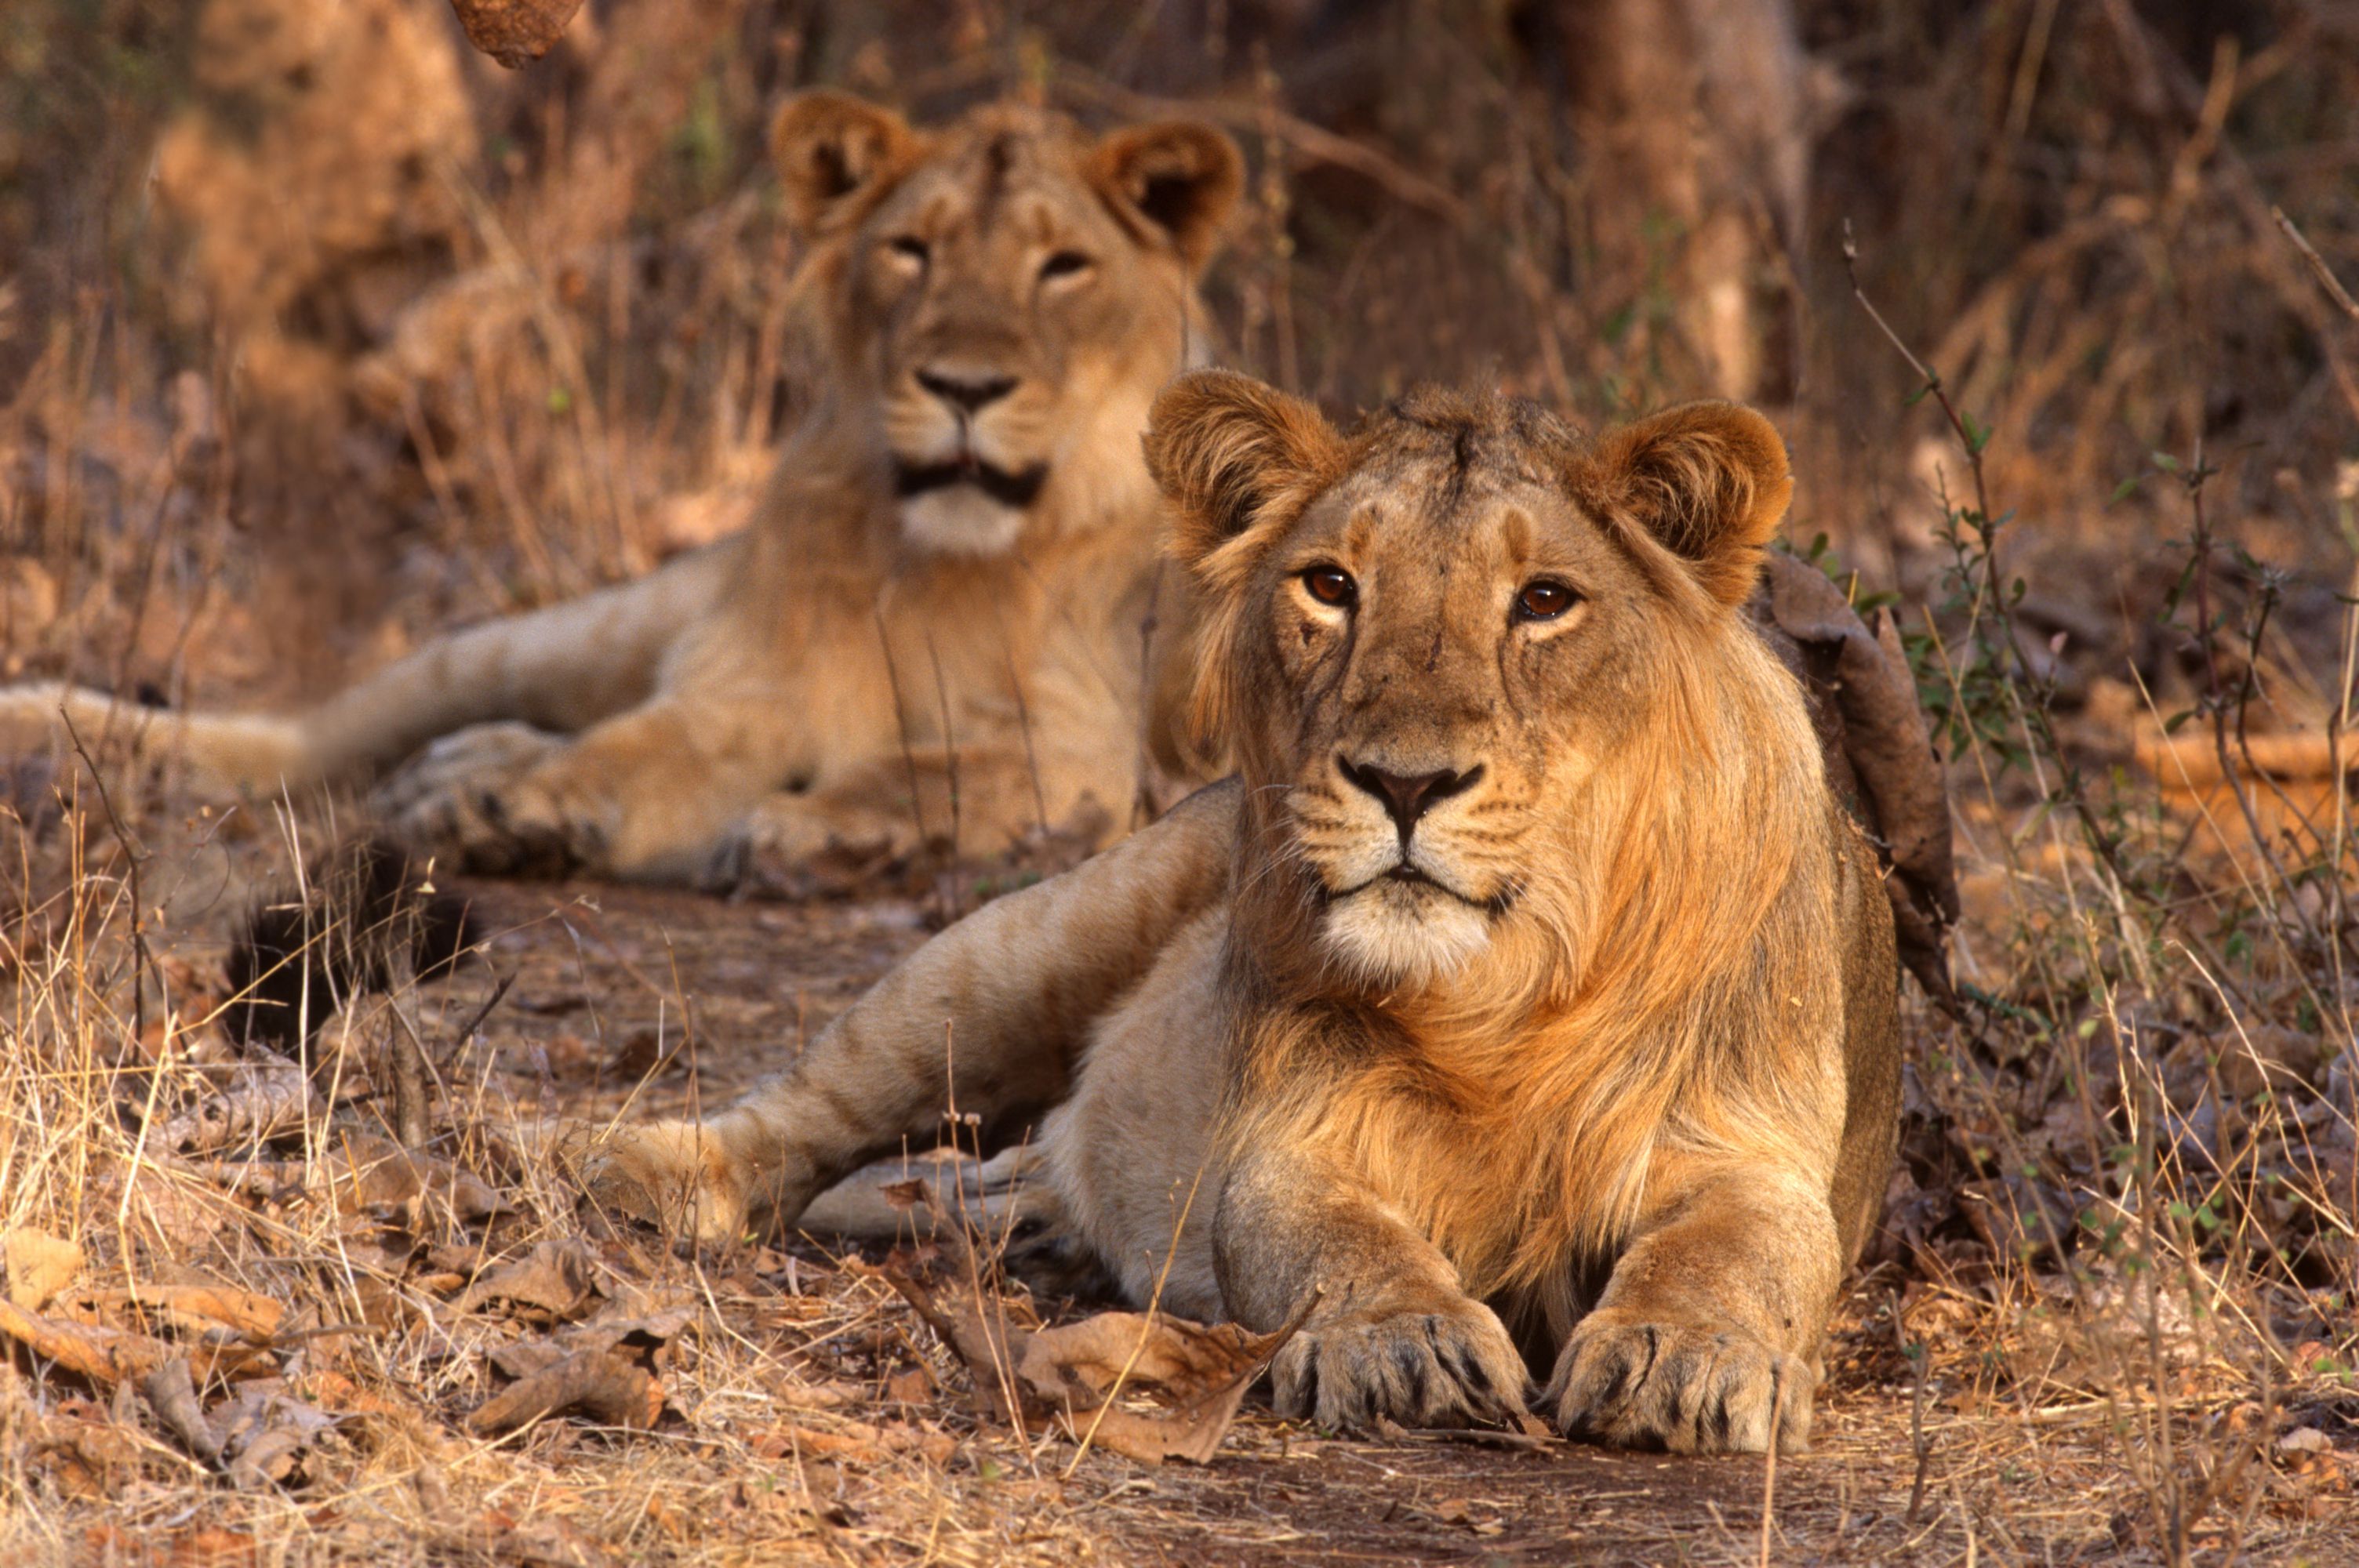 Gir National Park and wildlife sanctuary also known as Sasan Gir is home for majestic Asiatic Lions. It is located near Talala Gir in Gujarat, India